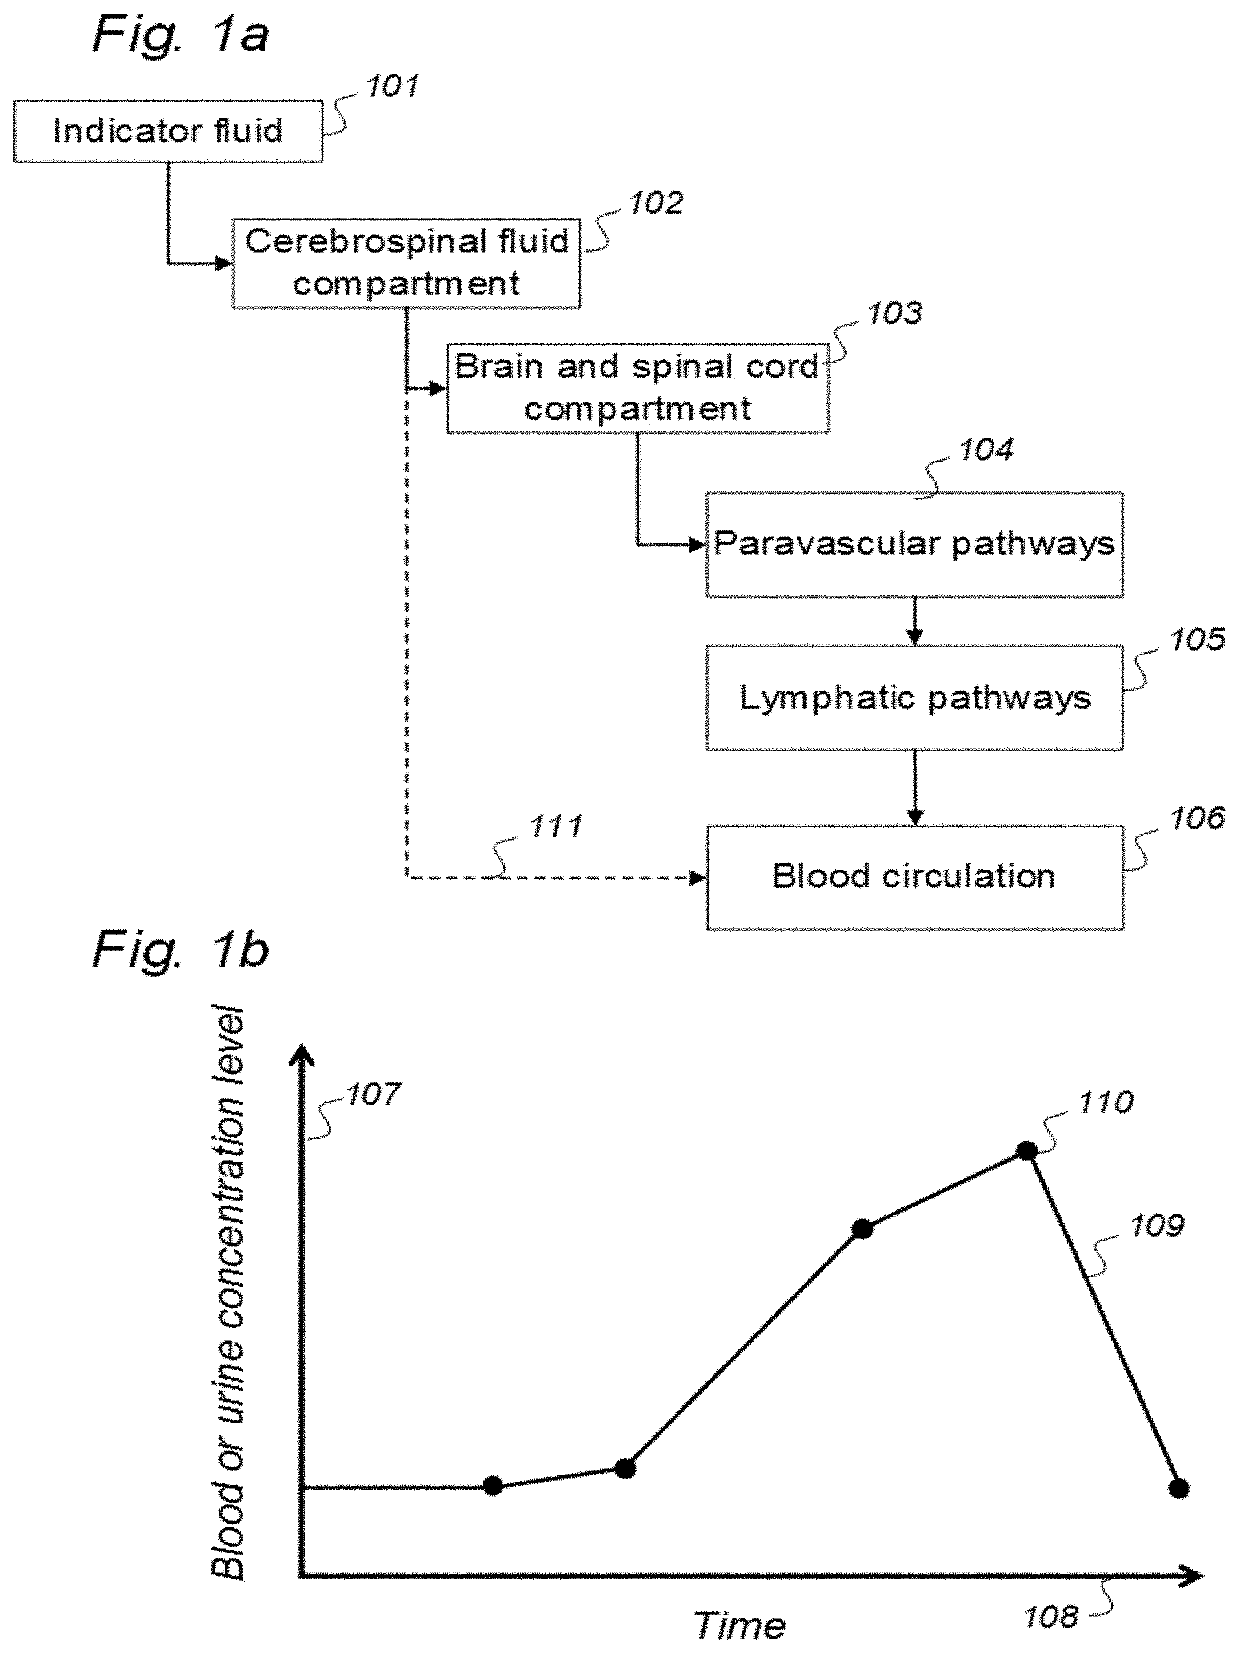 Indicator Fluids, Systems, and Methods for Assessing Movement of Substances Within, To or From a Cerebrospinal Fluid, Brain or Spinal Cord Compartment of a Cranio-Spinal Cavity of a Human